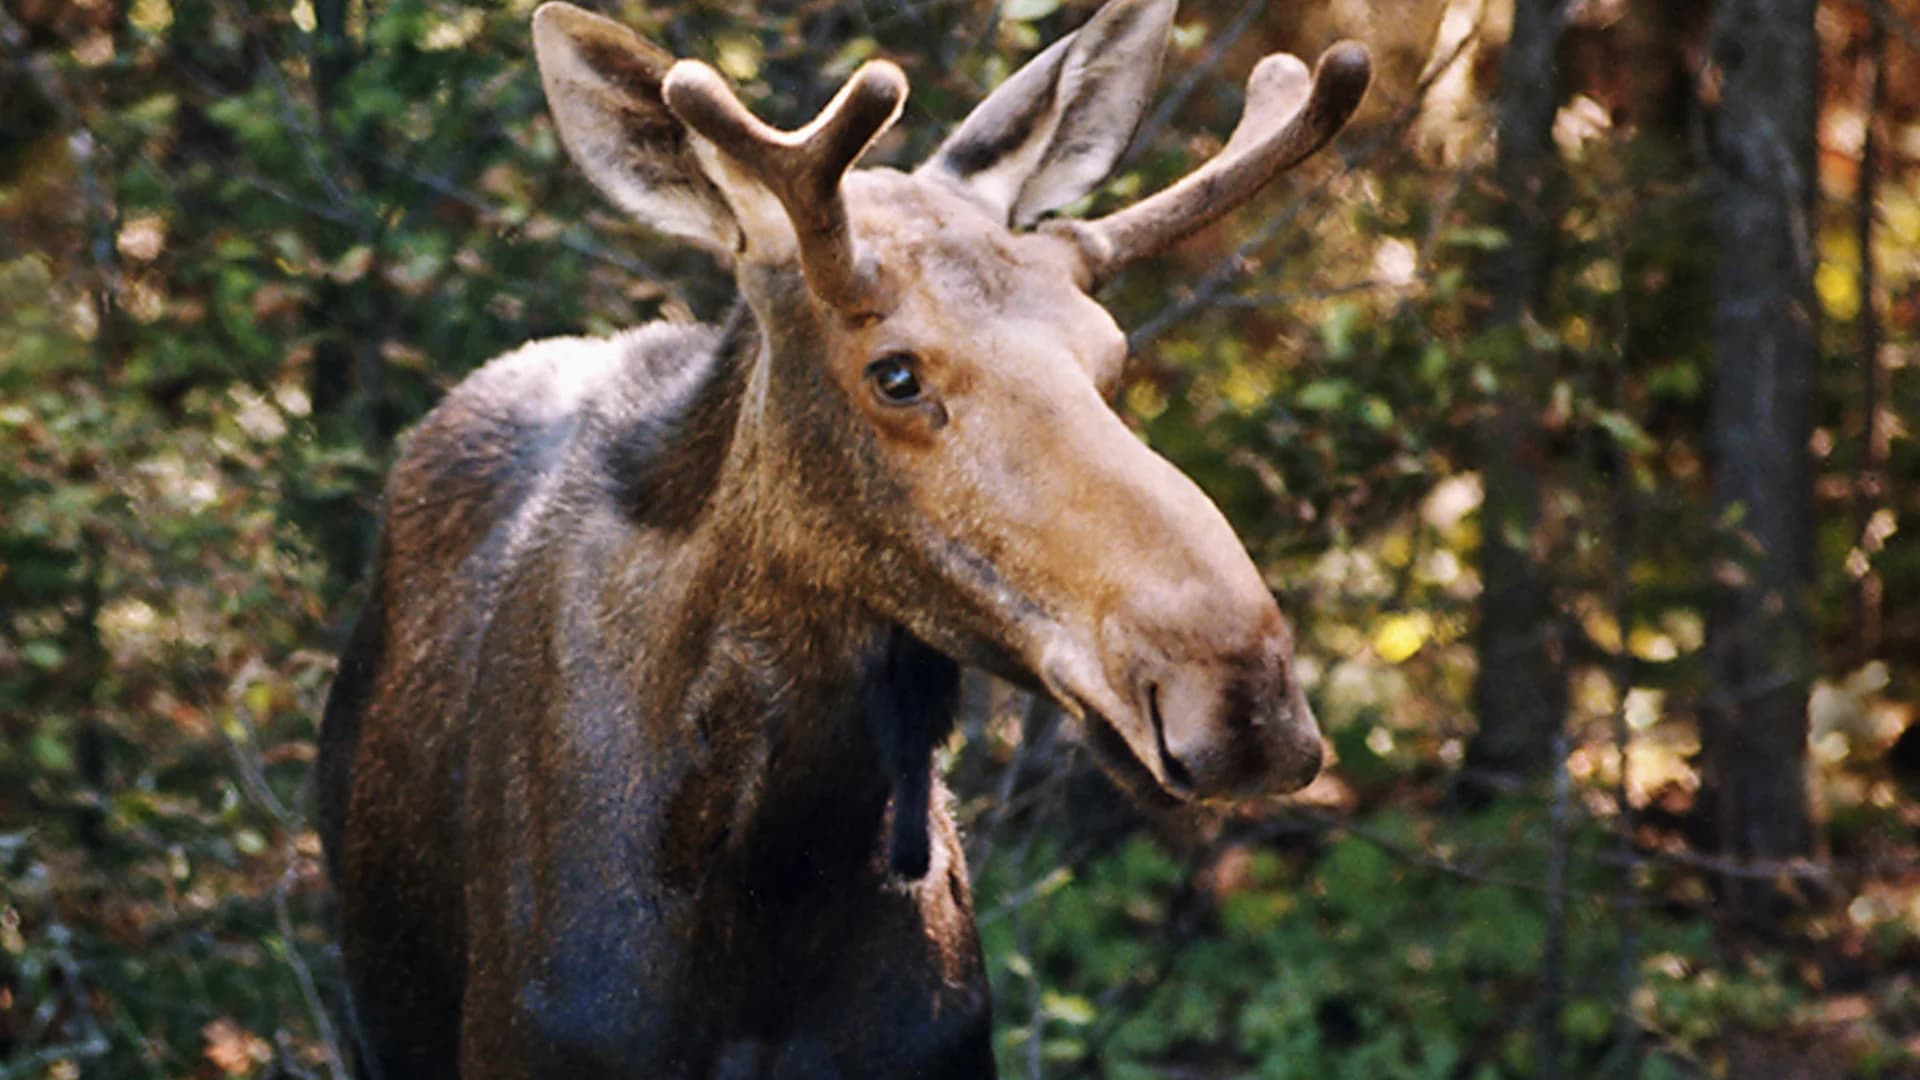 DEEP advises drivers to be cautious following recent moose sightings